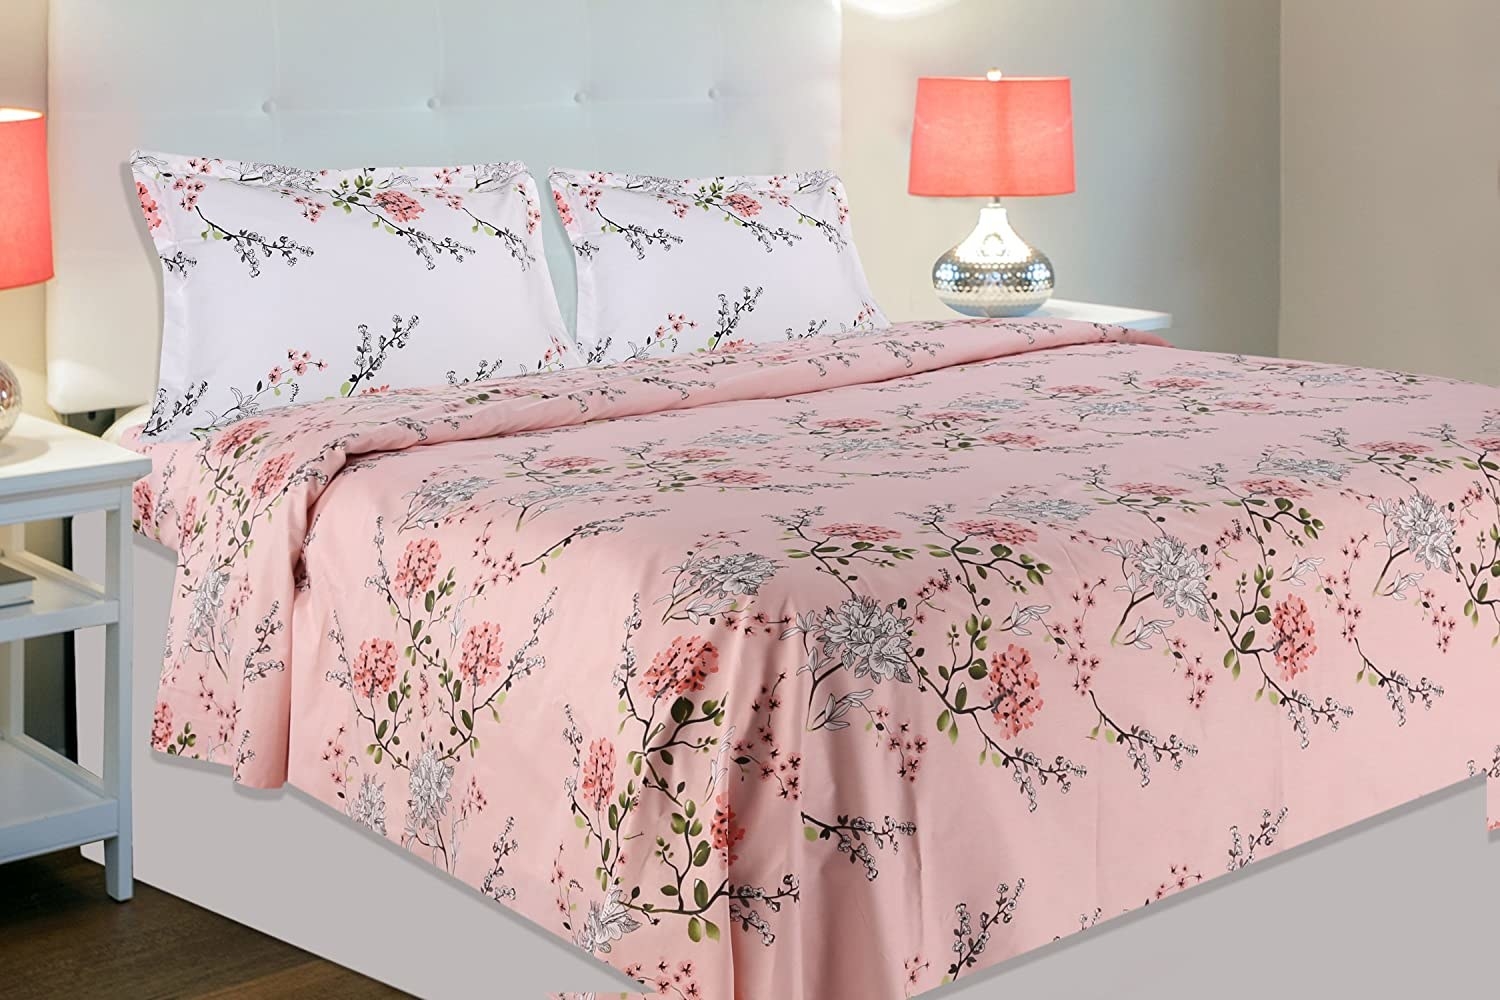 A pink and white floral bedsheet on a bed